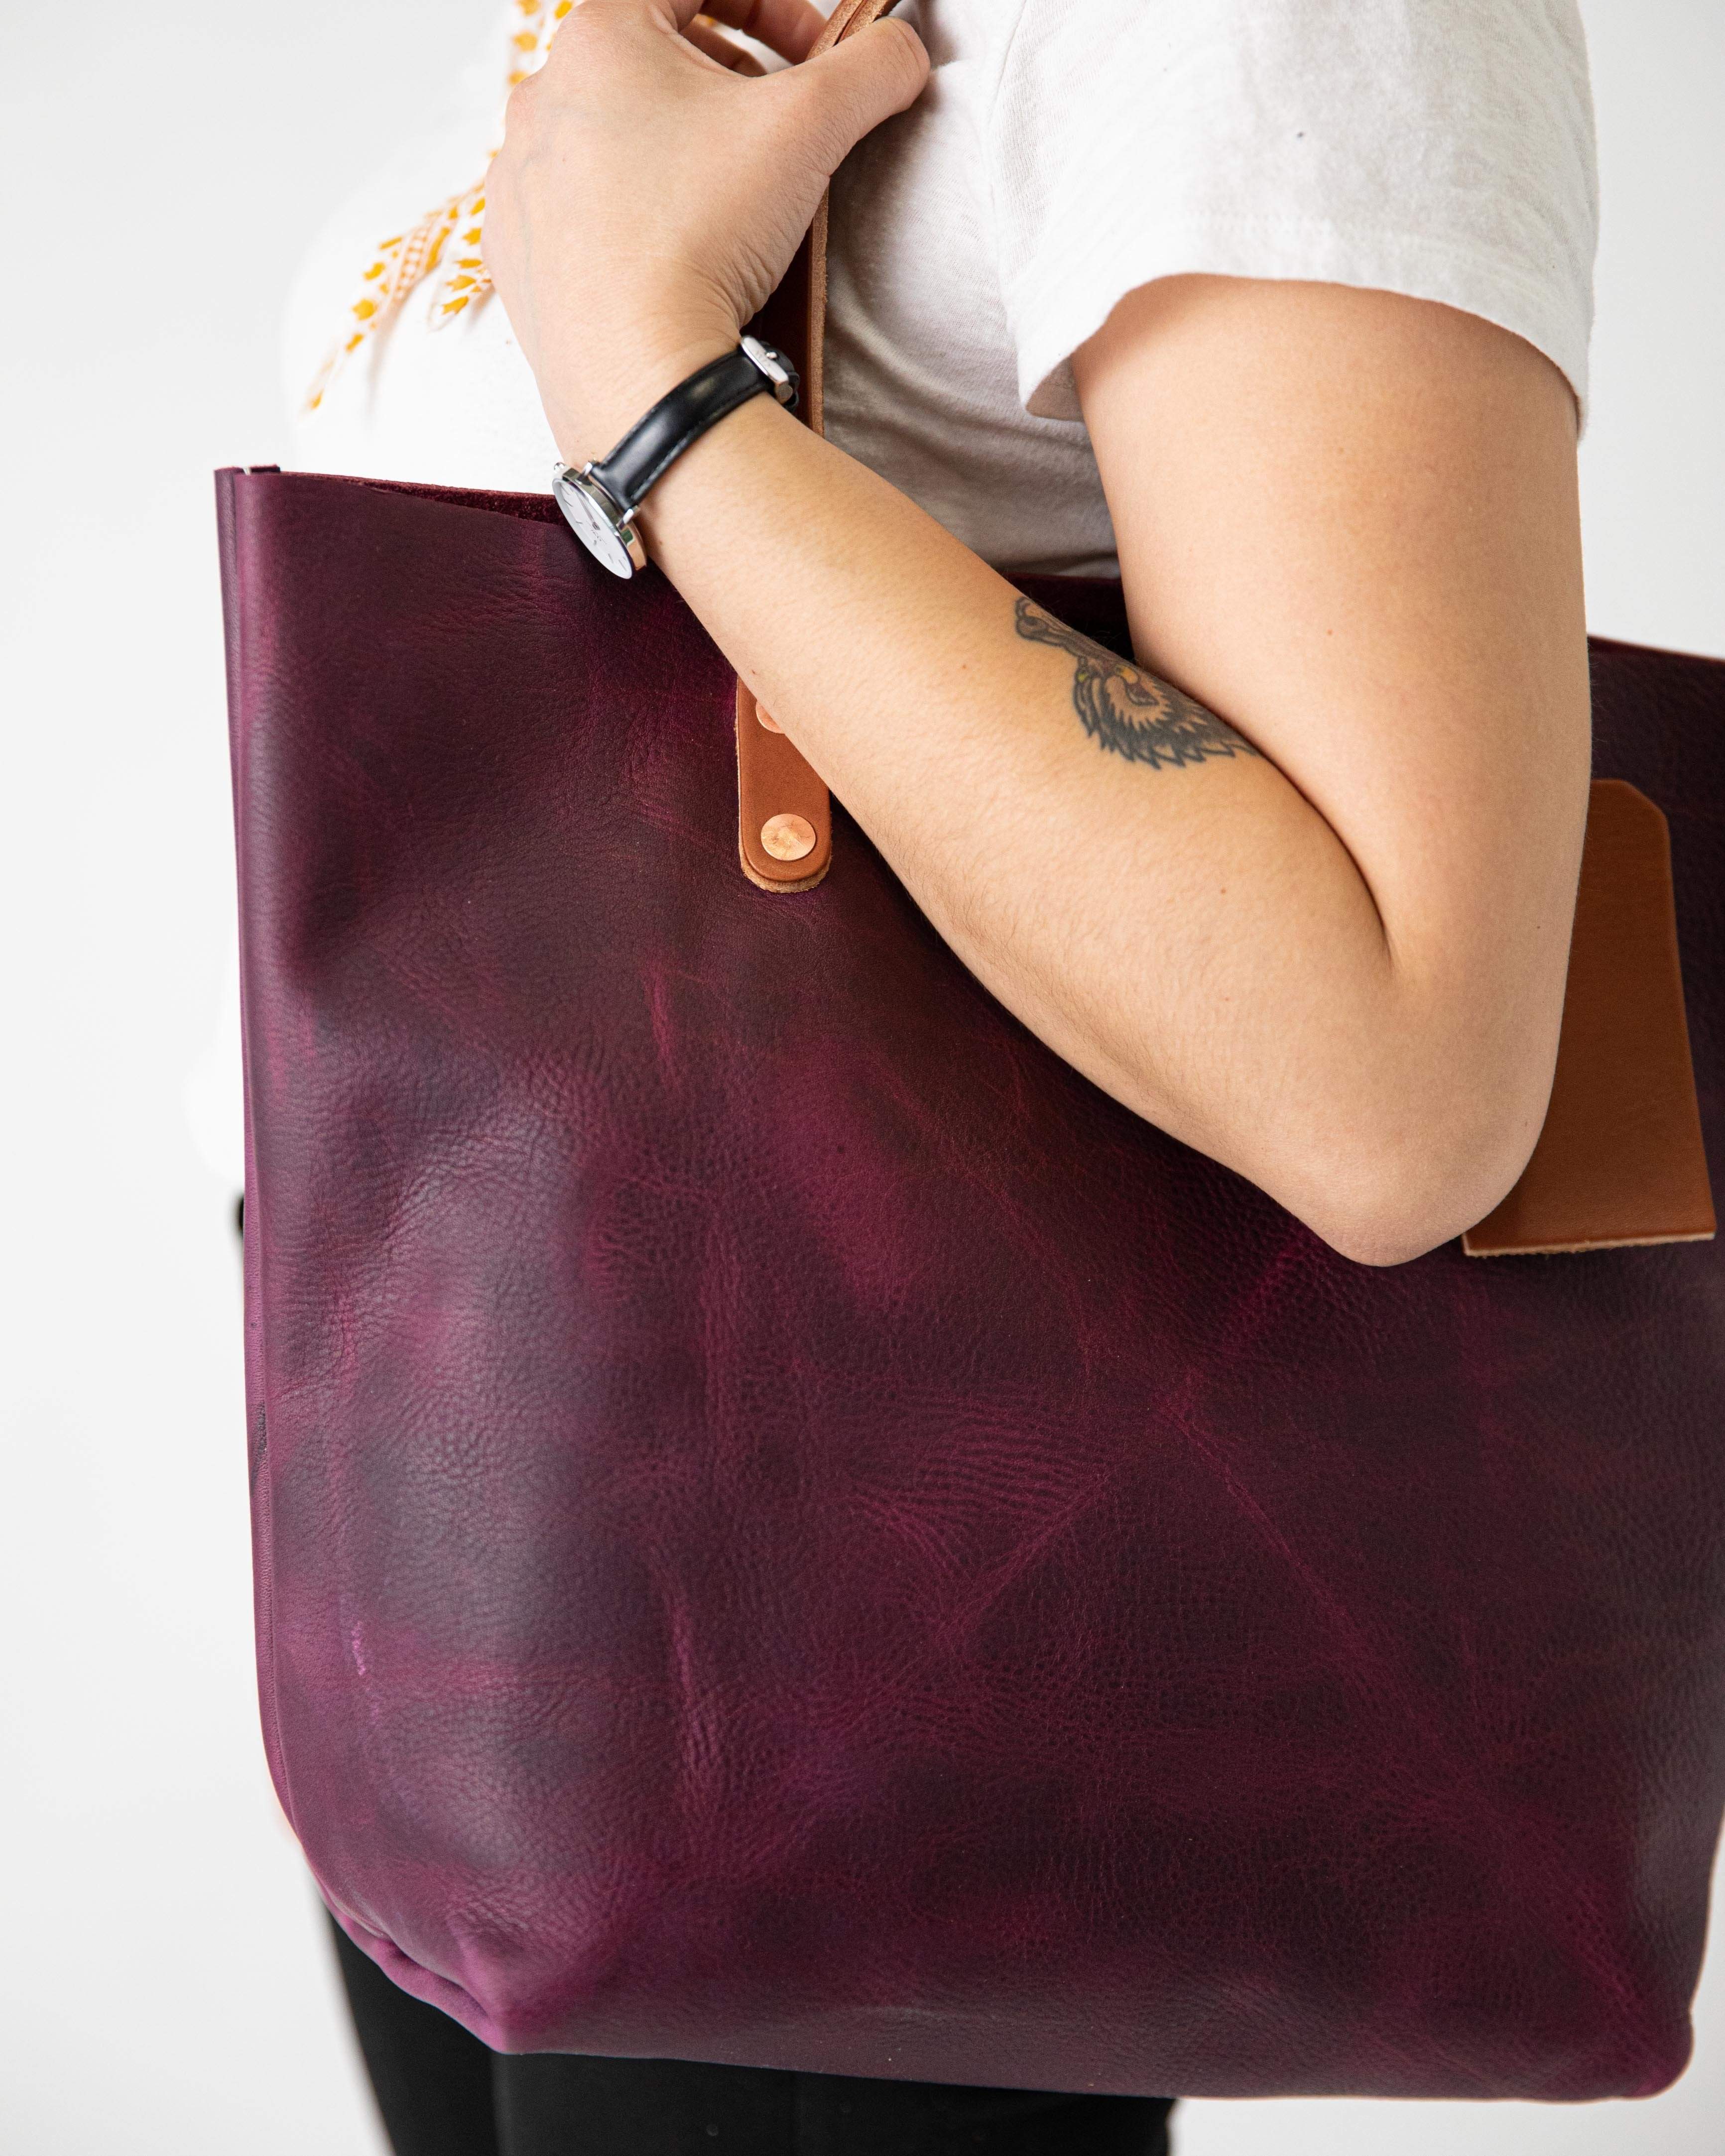 KMM & Co. Leather Tote Bag